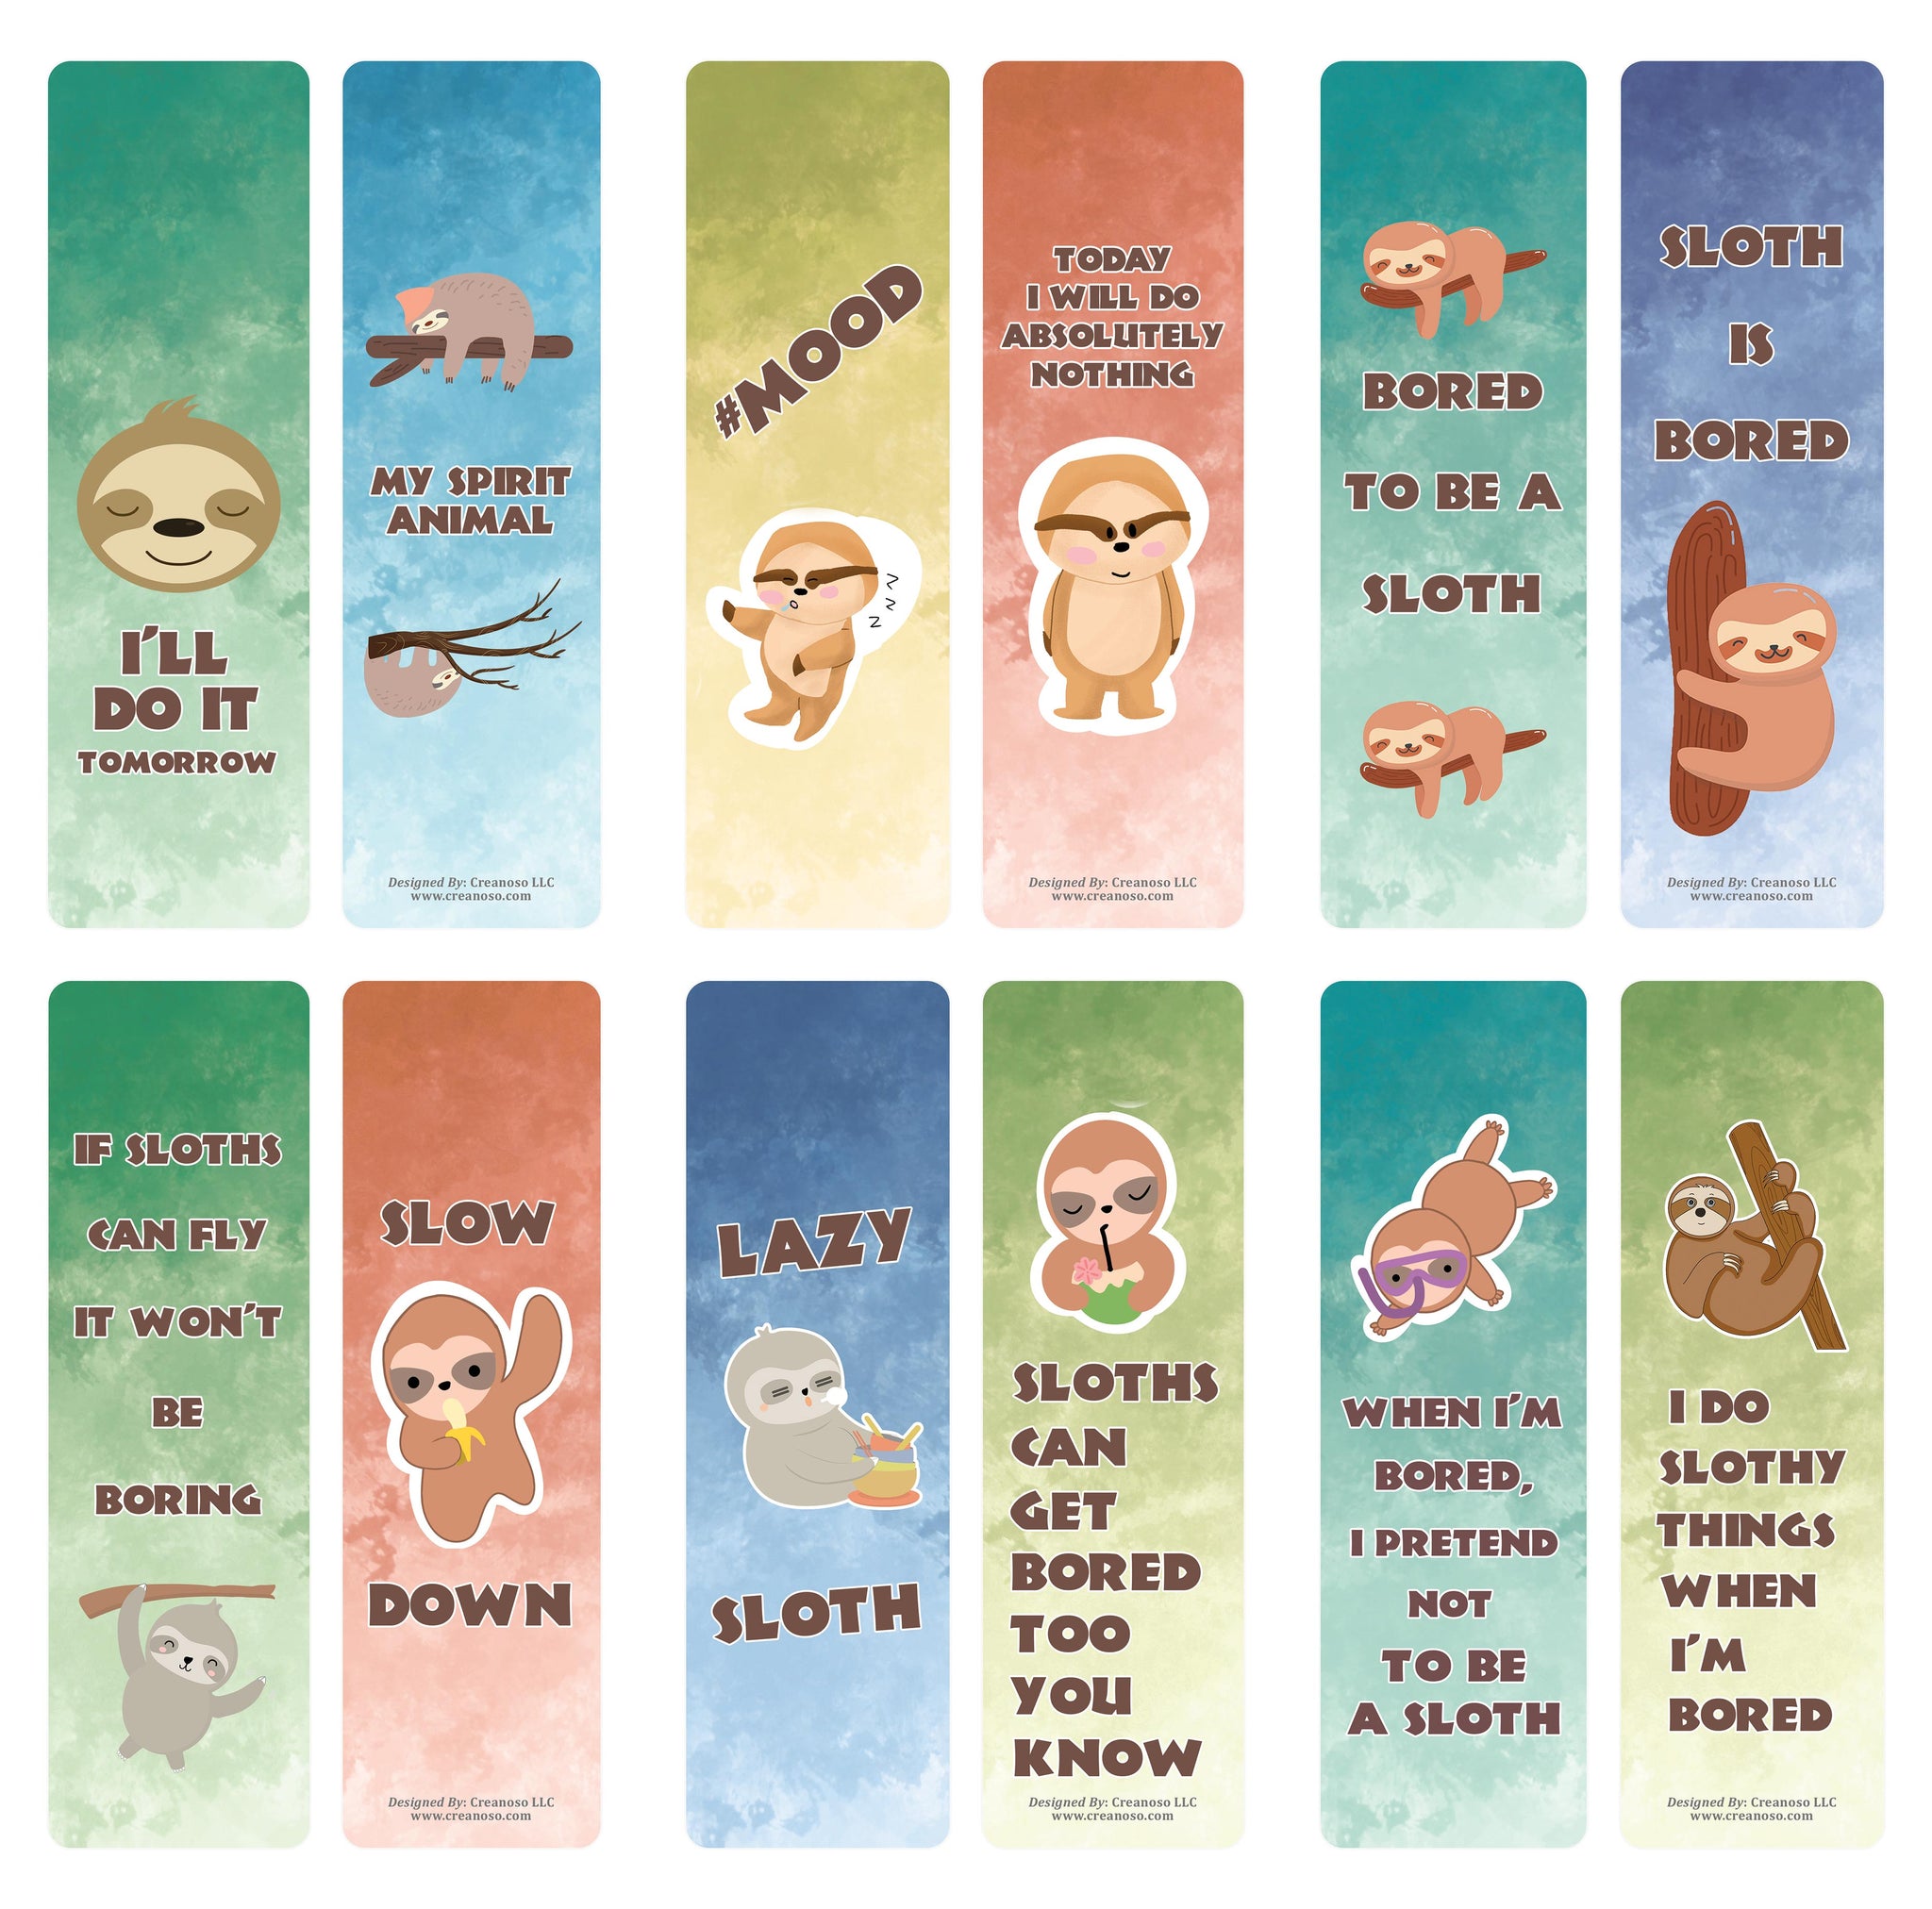 Creanoso Bored Animal Sayings Bookmarks - Sloth Theme (10-Sets X 6 Cards) â€“ Daily Inspirational Card Set â€“ Interesting Book Page Clippers â€“ Great Gifts for Adults and Professionals